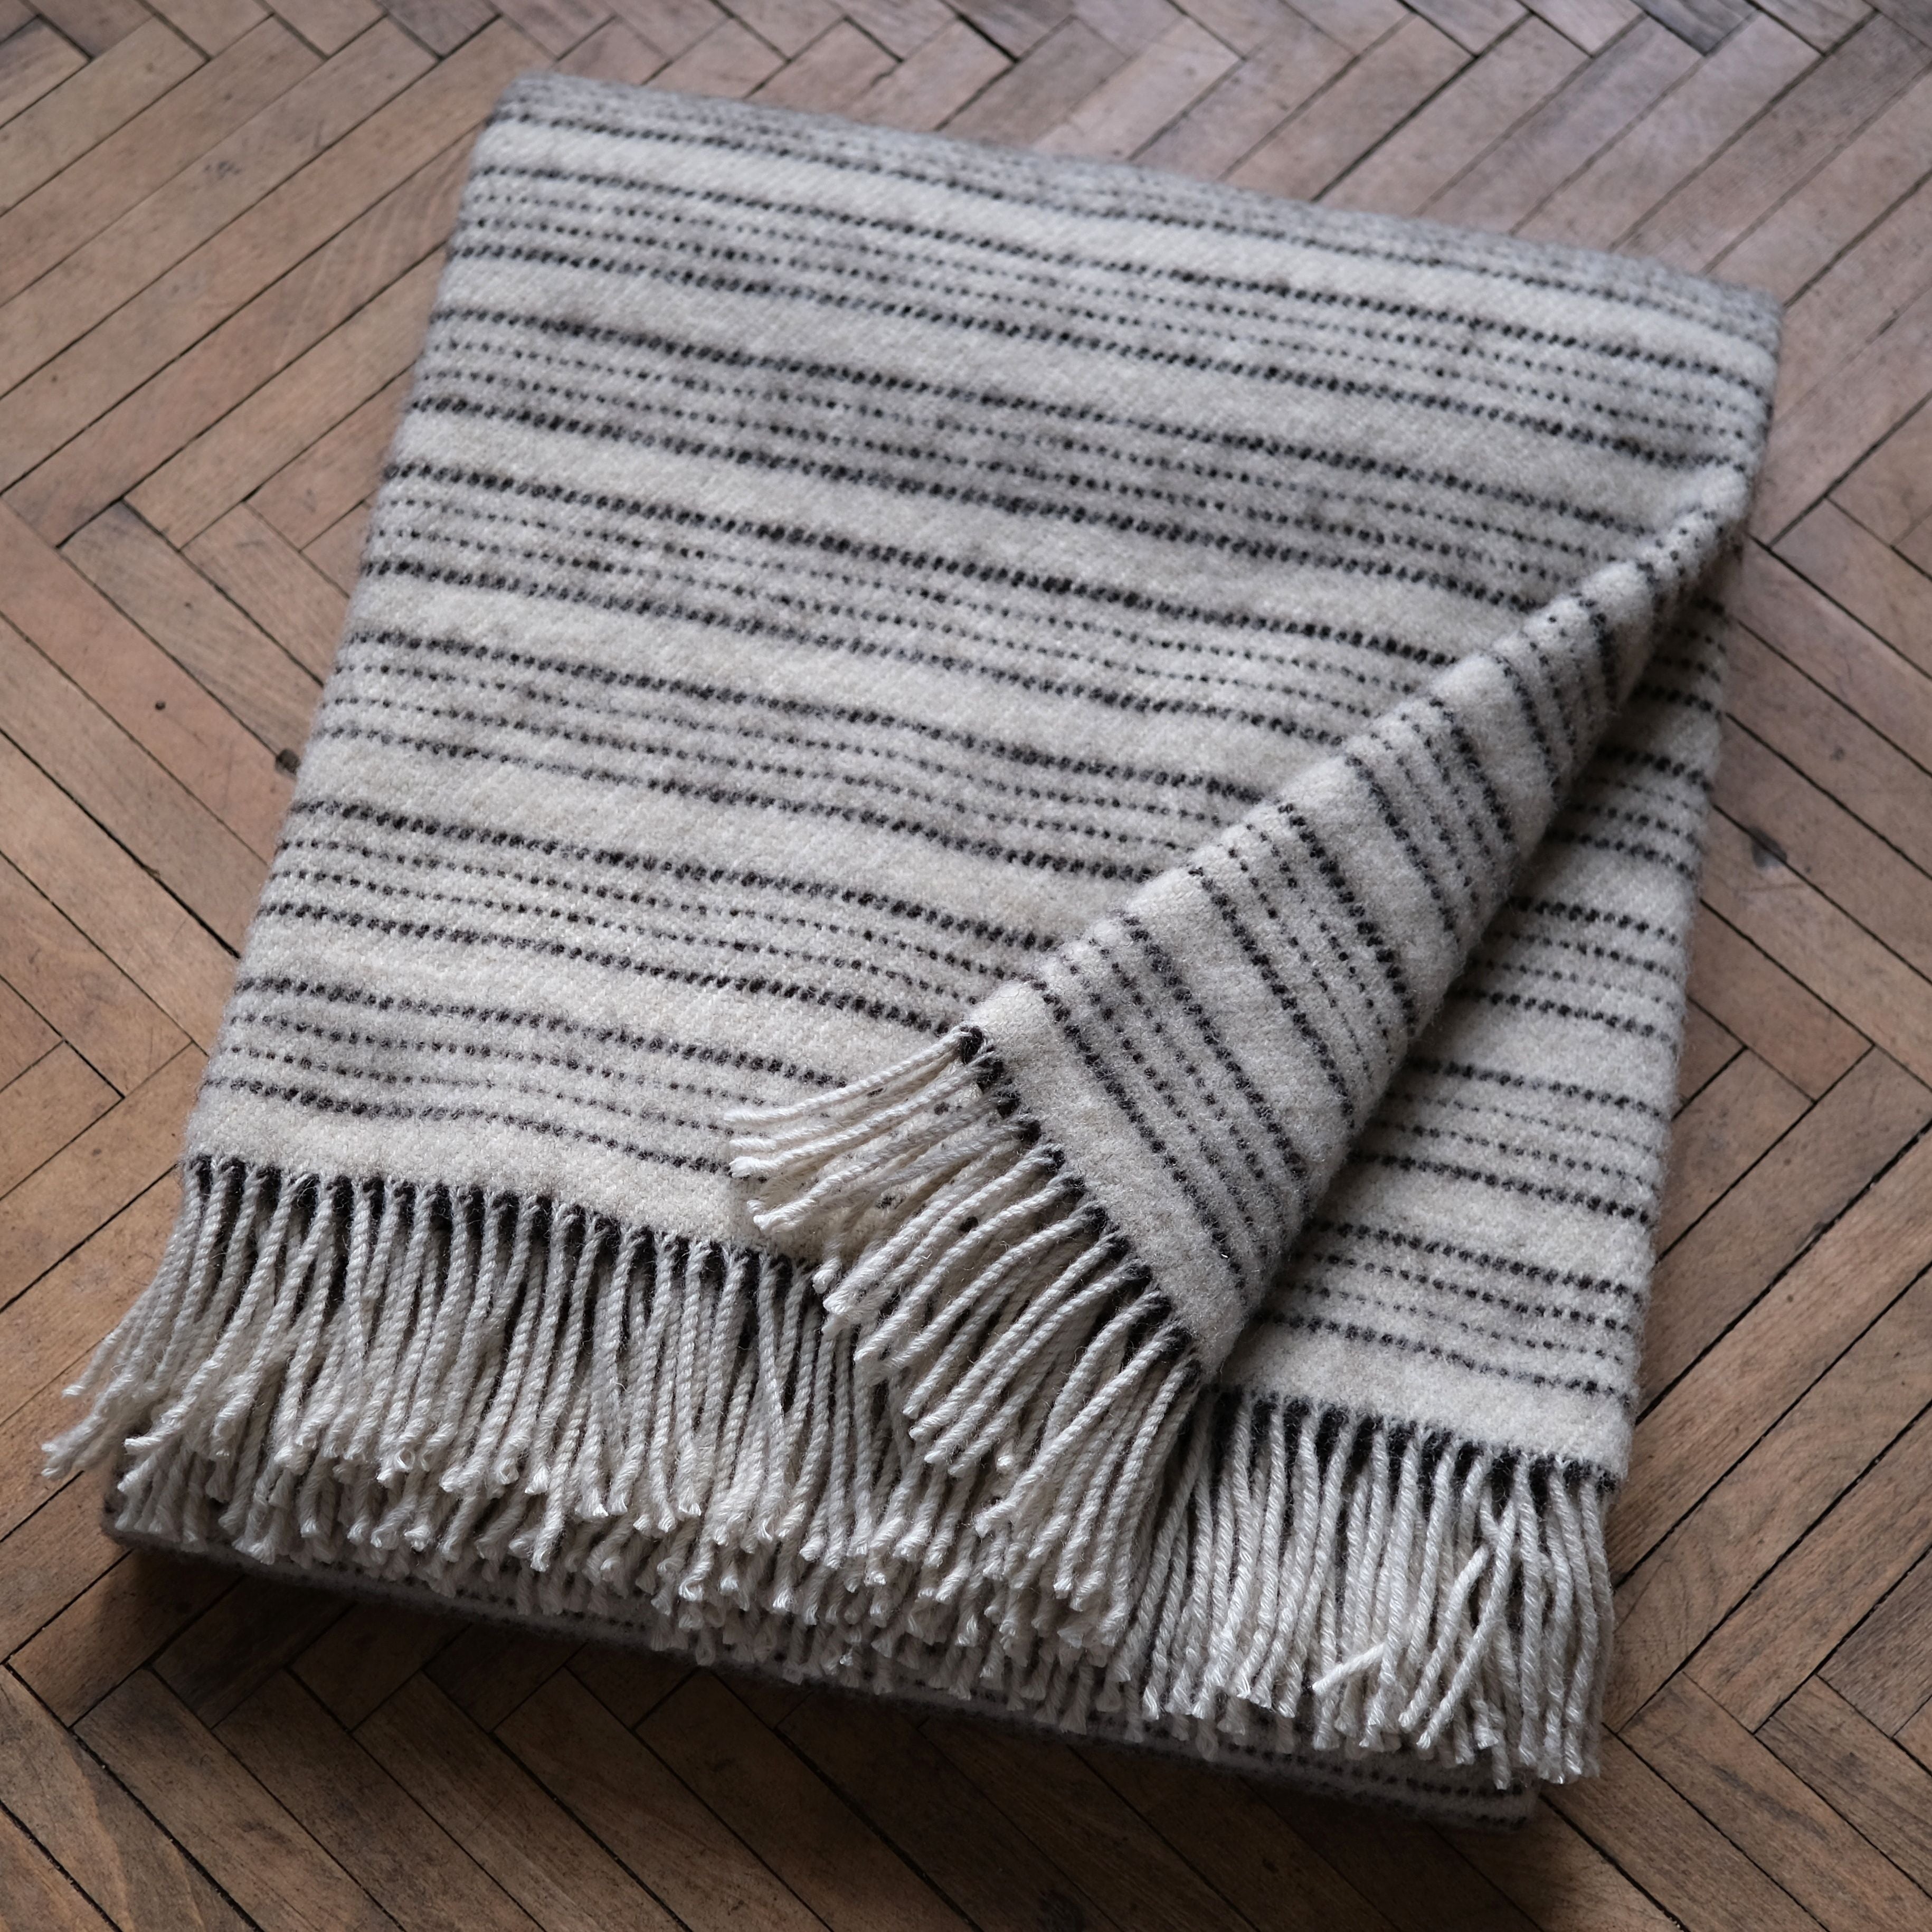 Sheep's wool blanket - striped sable